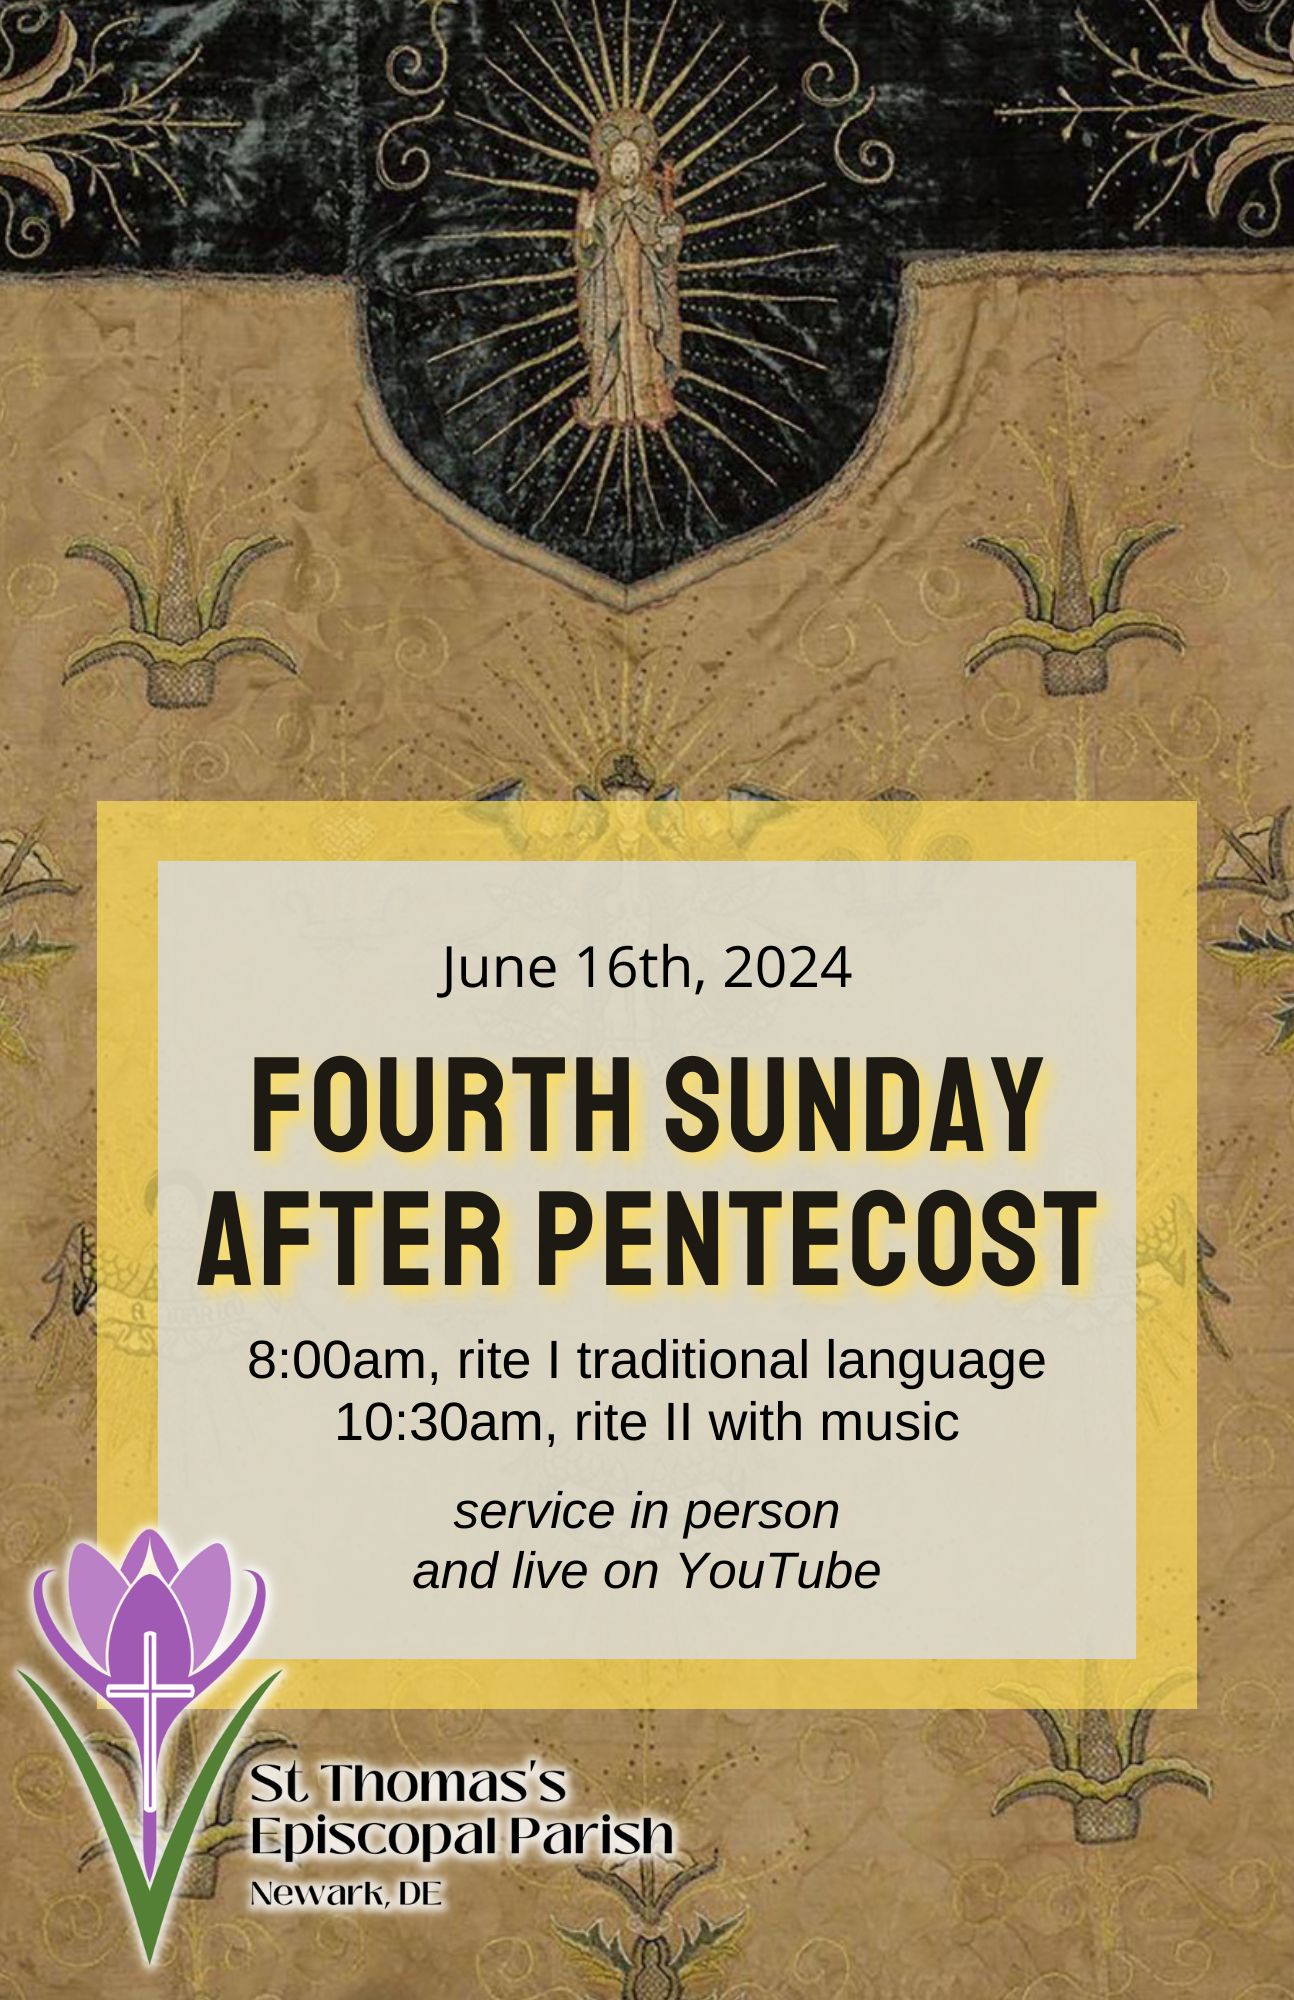 Fourth Sunday after Pentecost